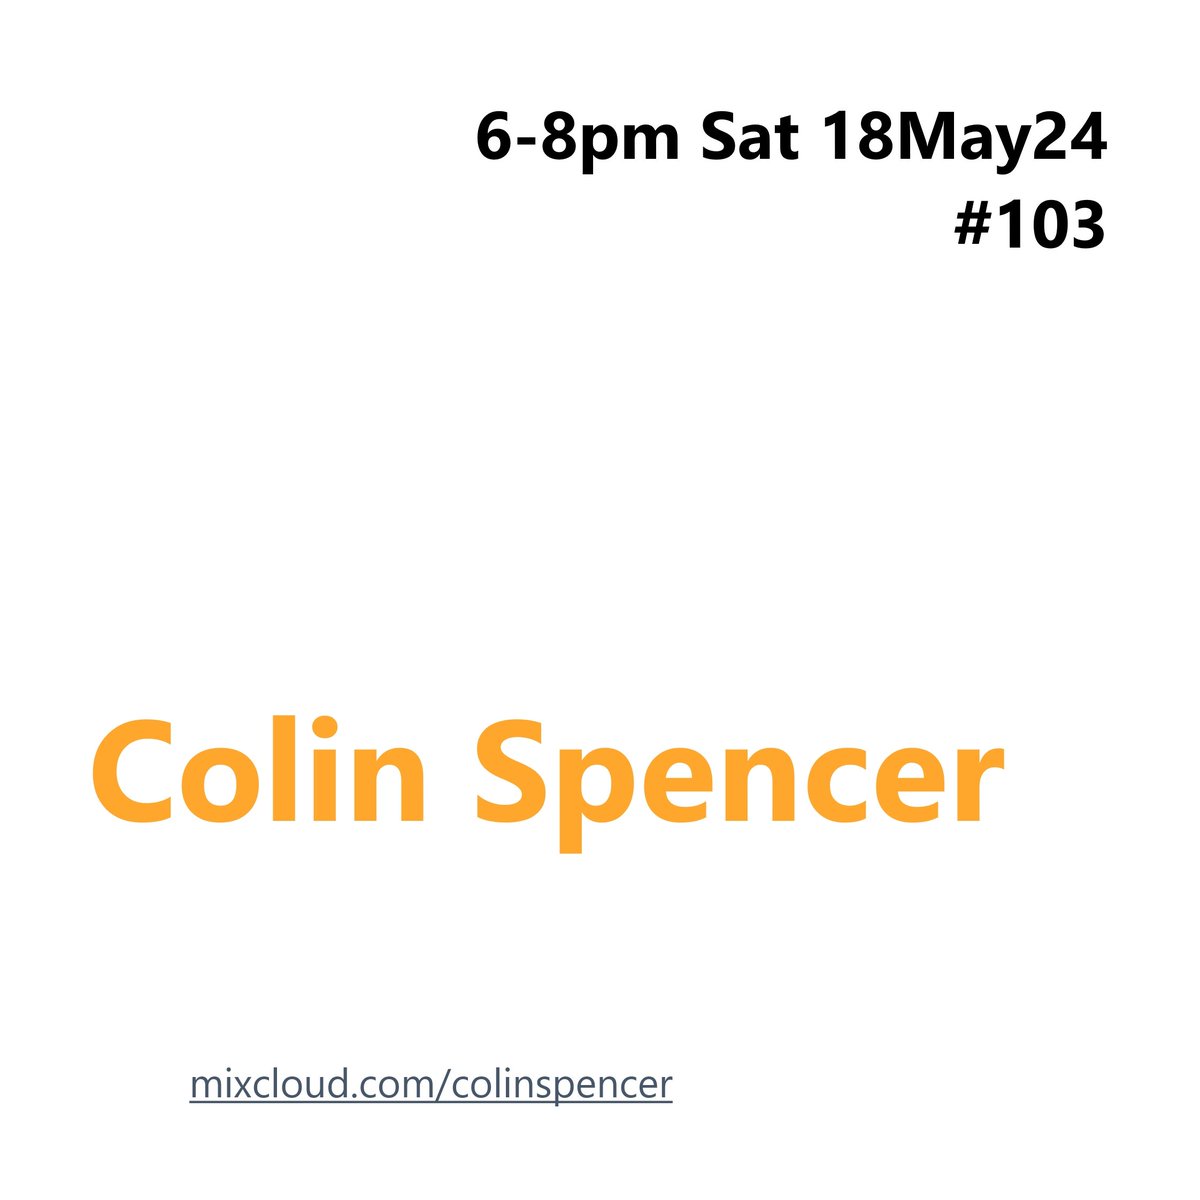 #EXCLUSIVE #TheDisordered 'Keep Callin'' from the album One #worldwide première firstplay during #ColinSpencer Programme #103 🔊mixcloud.com/colinspencer/🎧 Saturday 18 May 2024 6-8pm (#UK times) #DiscoverAndRemember @thedisordered1 Try catch-up #099 ▶️mixcloud.com/ColinSpencer/c…